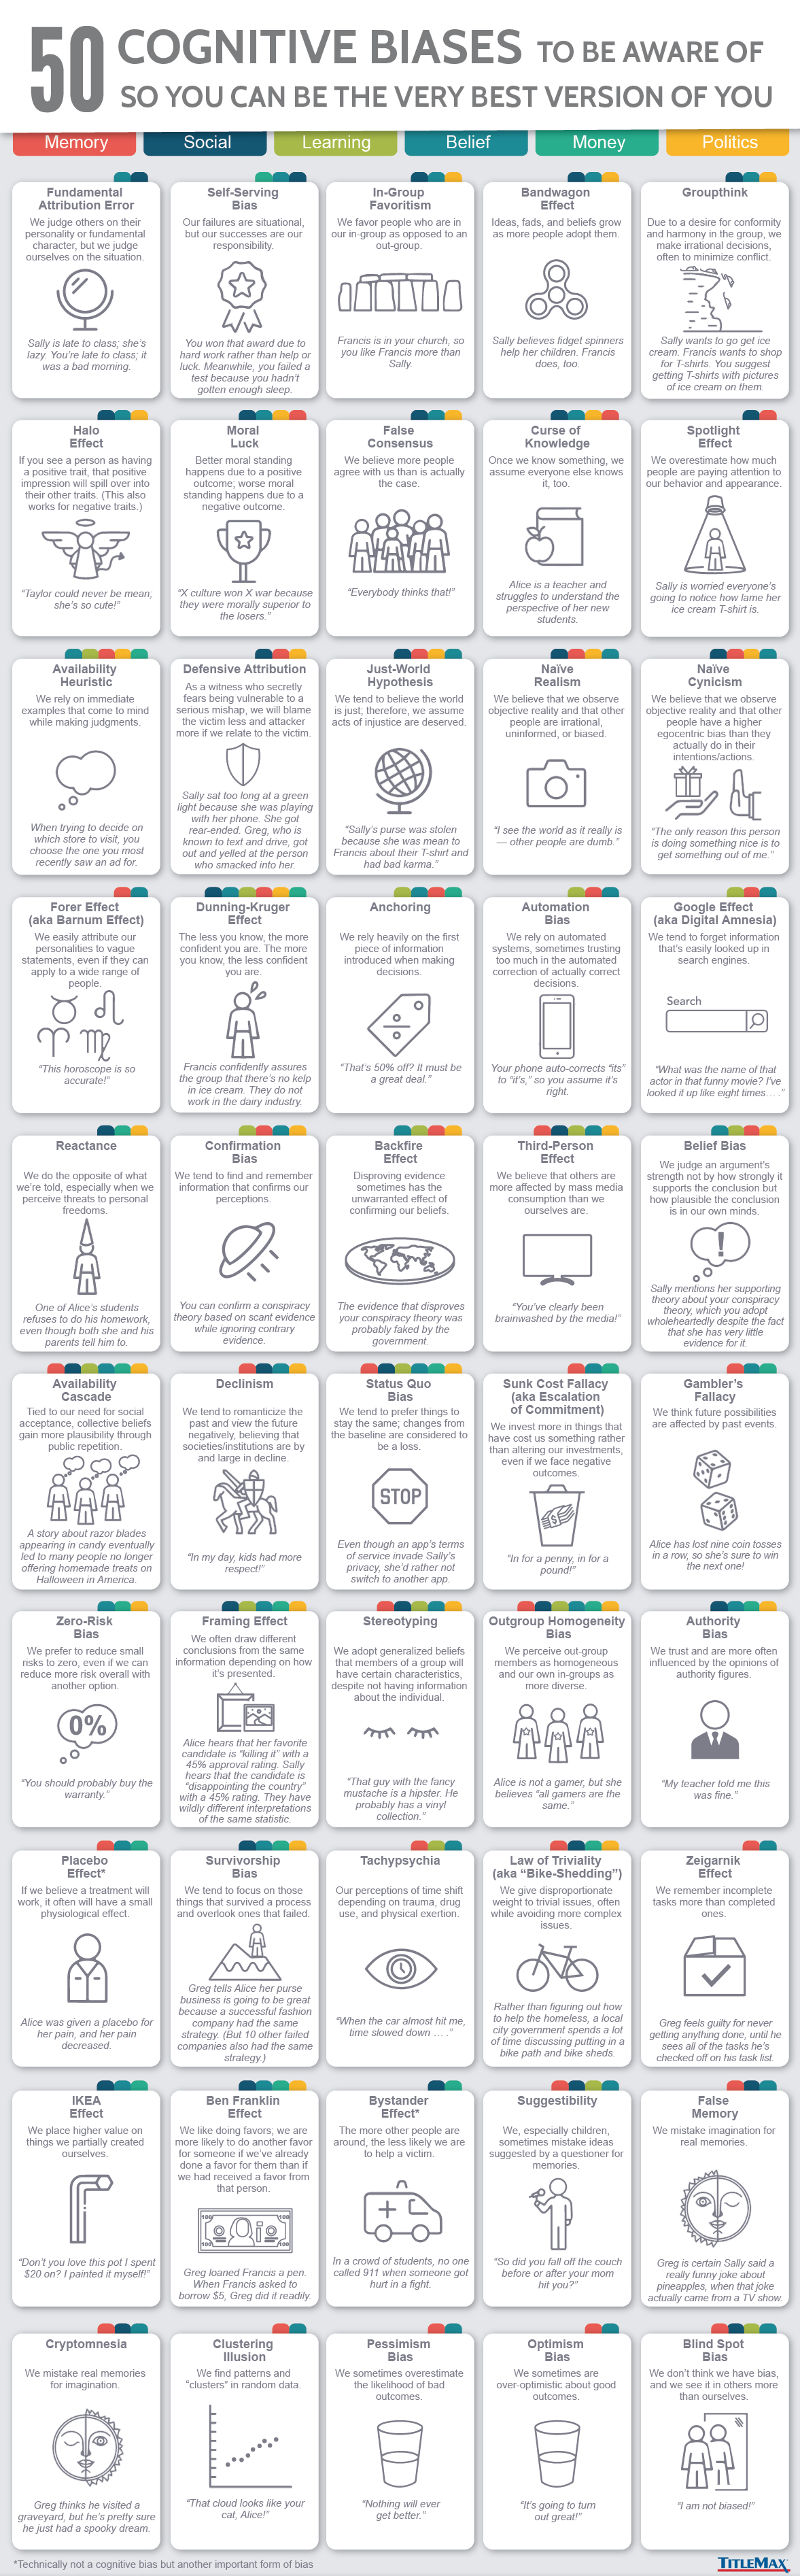 50 Cognitive Biases Infographic